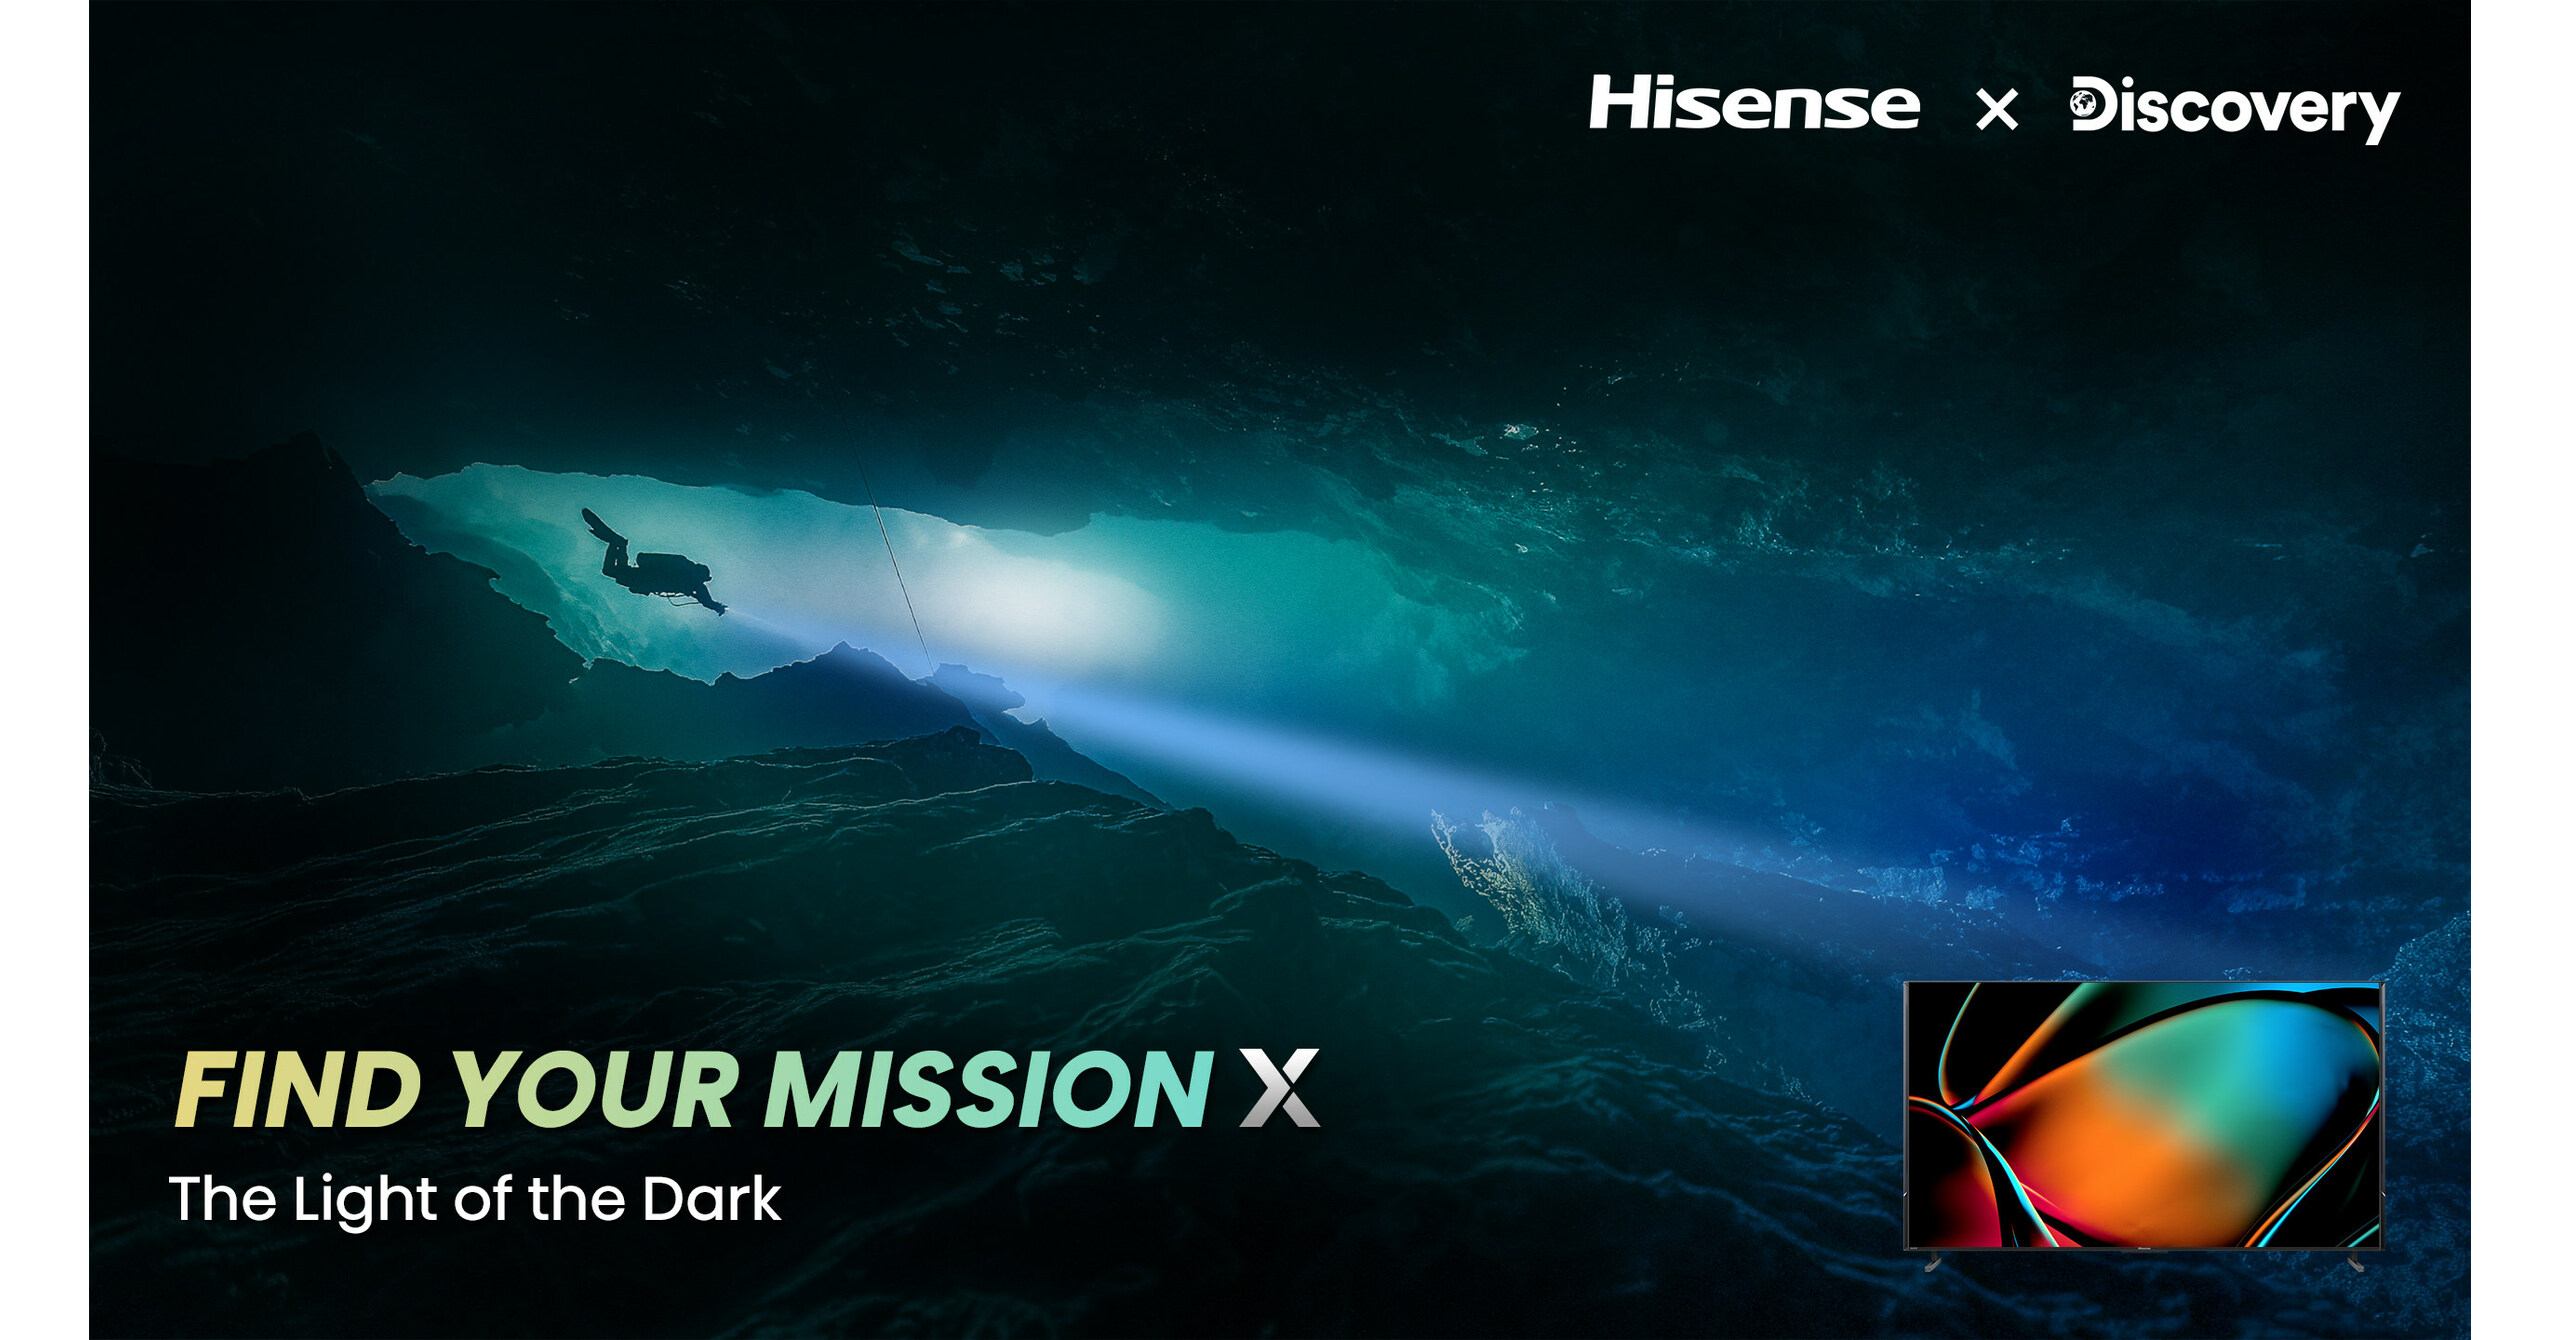 Hisense’s partnership with Discovery encourages consumers to “find their mission X” by fostering a spirit of exploration and curiosity USA – English USA – English